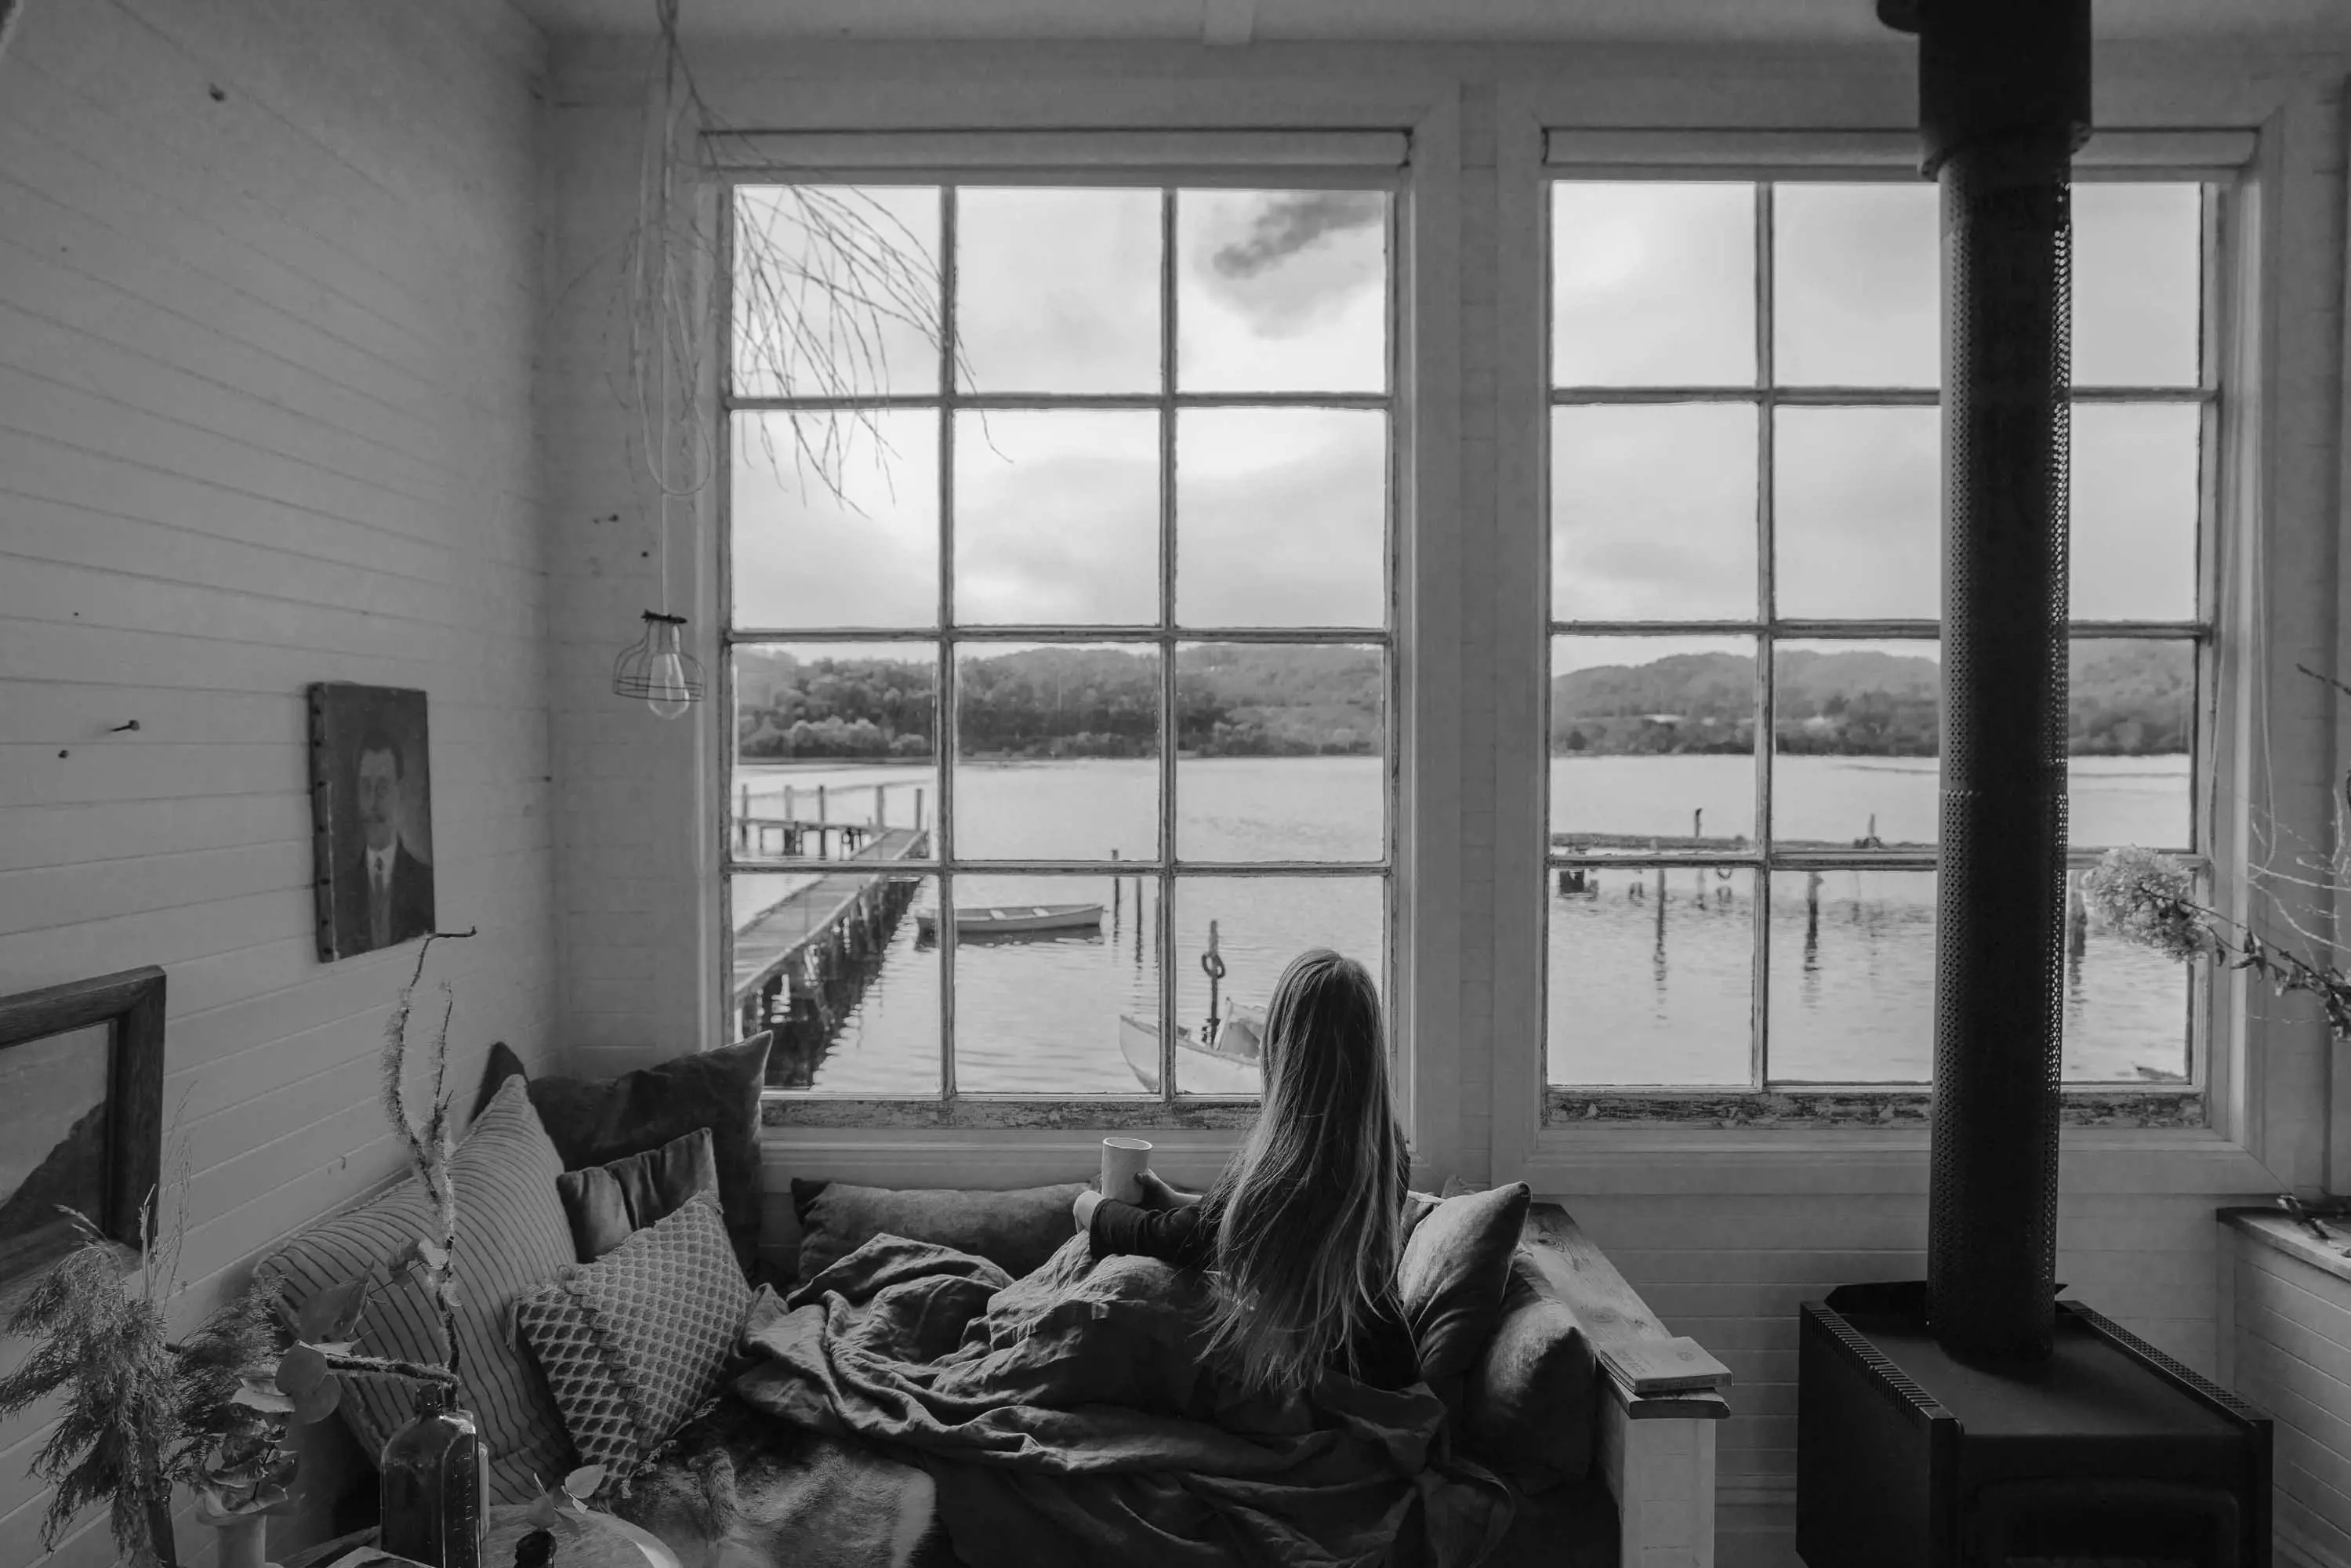 A young woman sits on a couch inside, looking out colonial style windows over water.